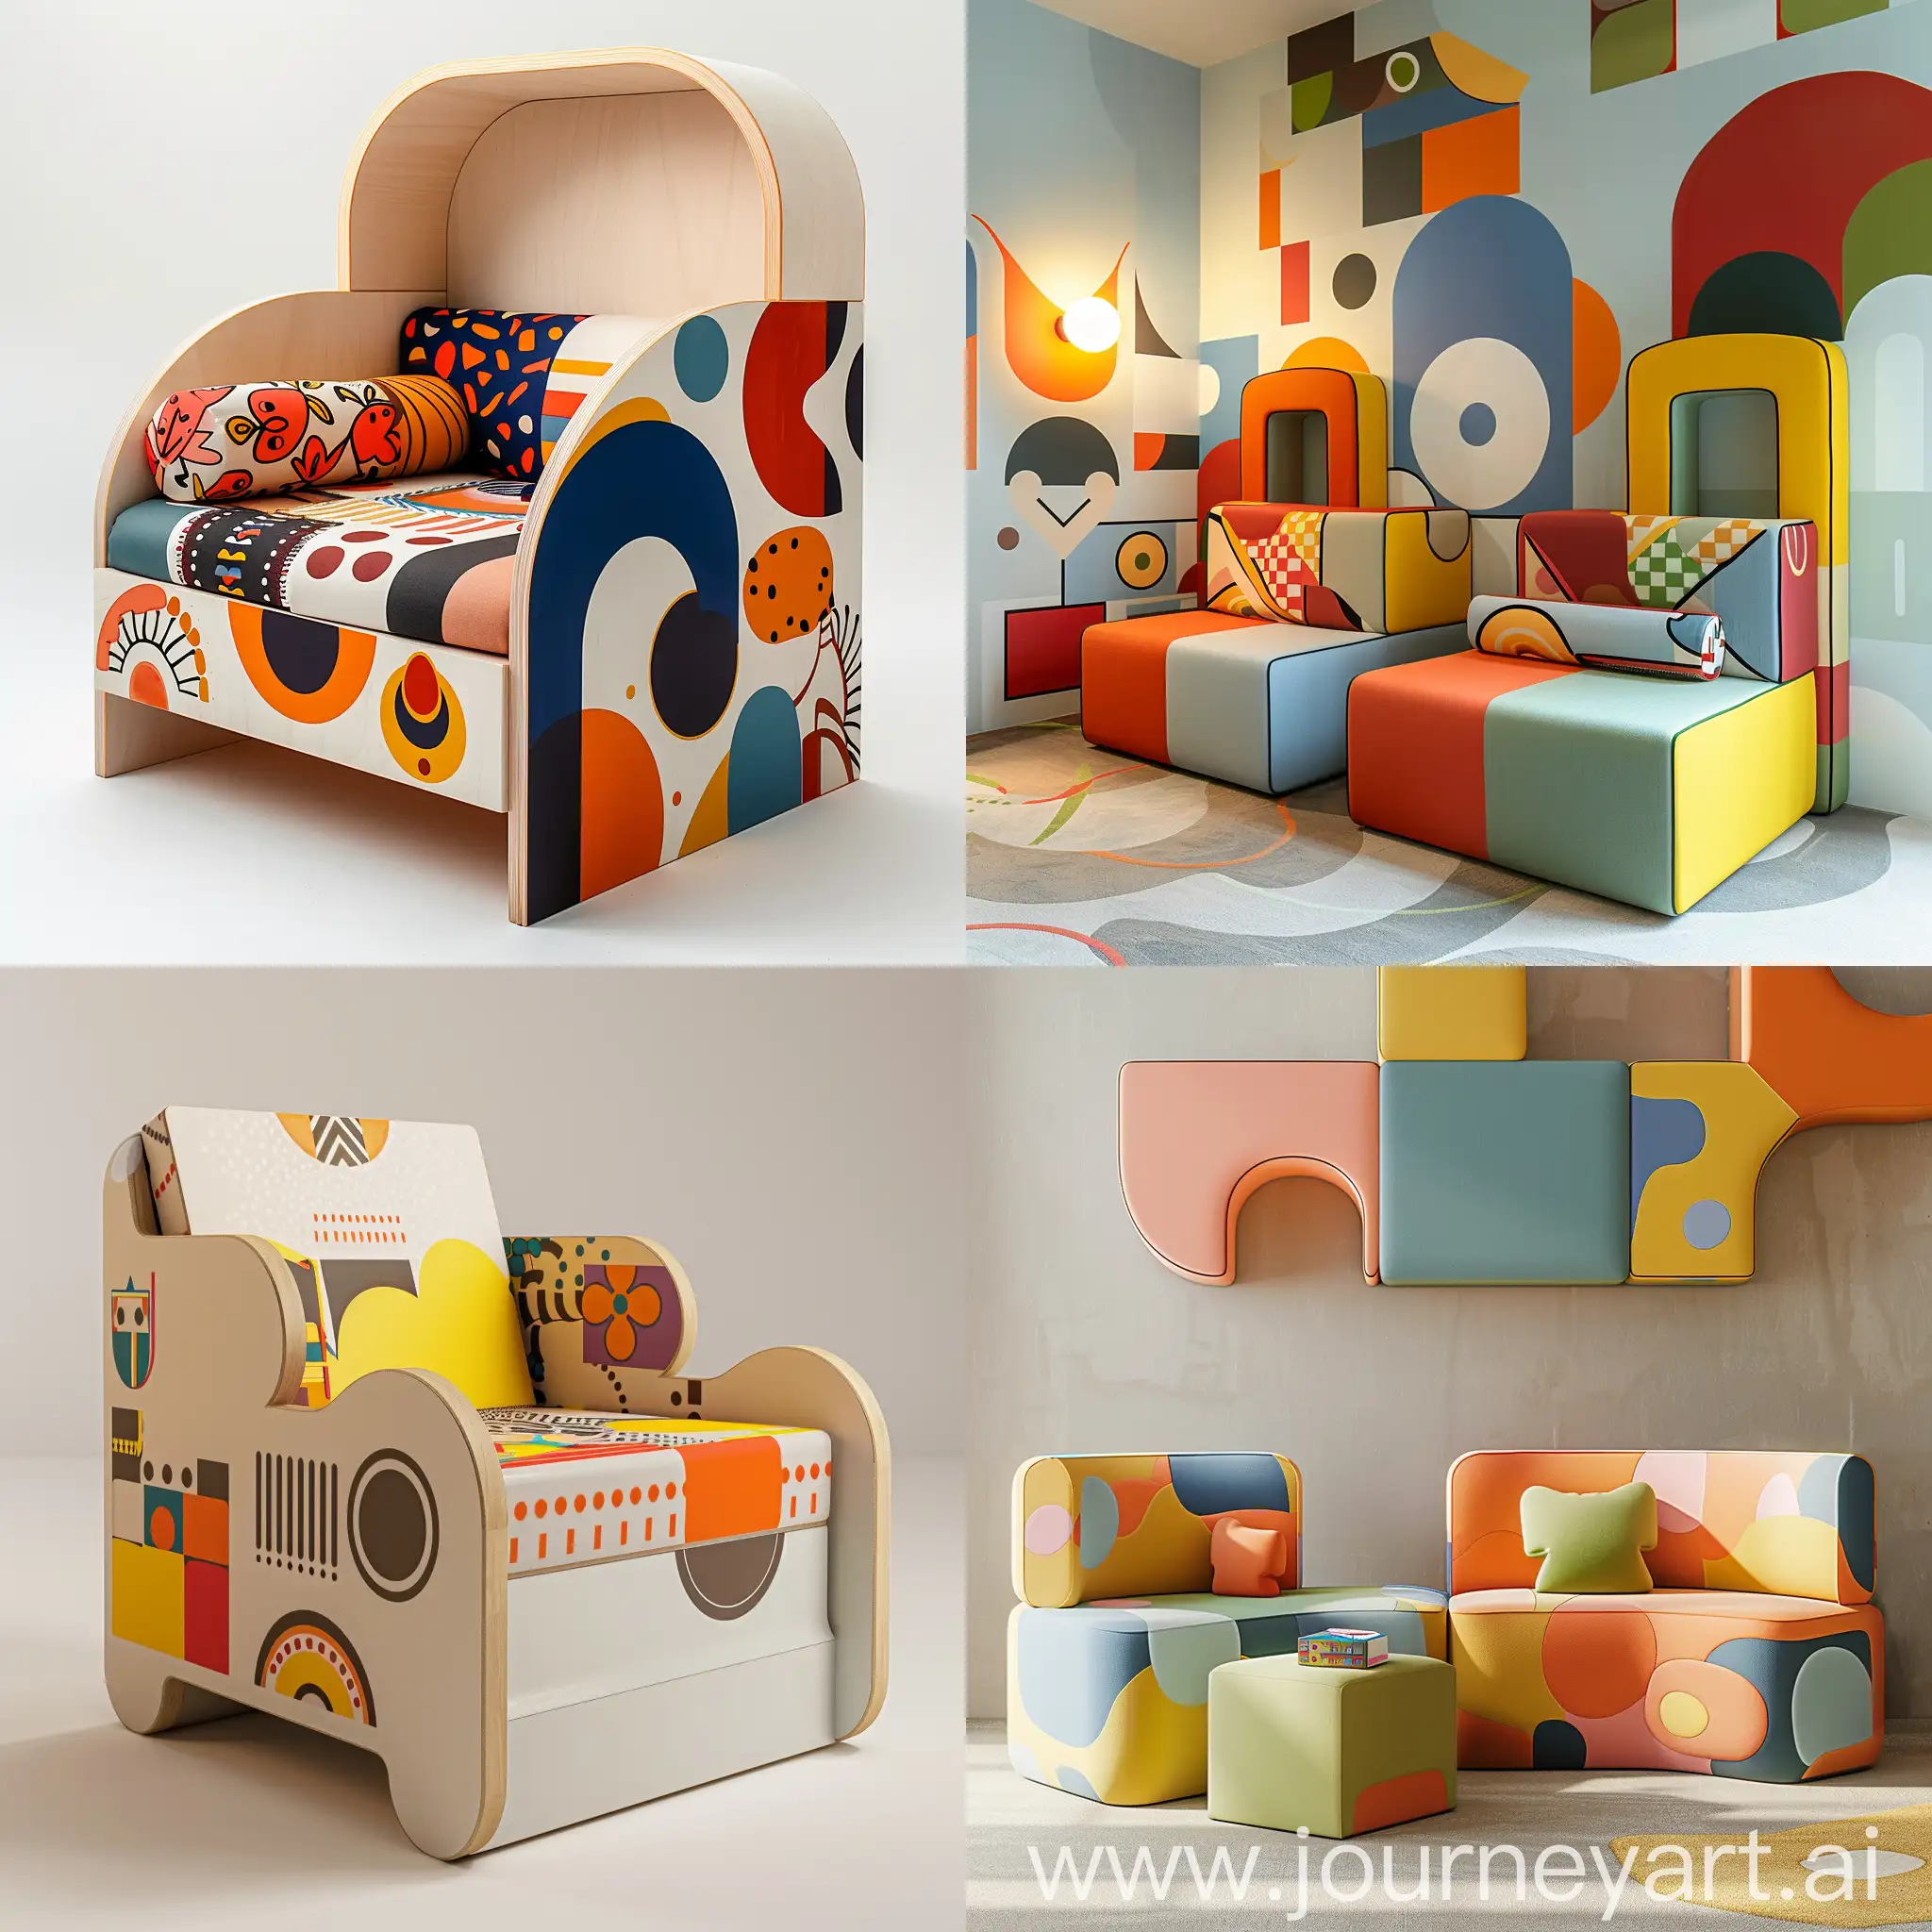 ParentChild-Interactive-Experience-with-Shared-Childrens-Furniture